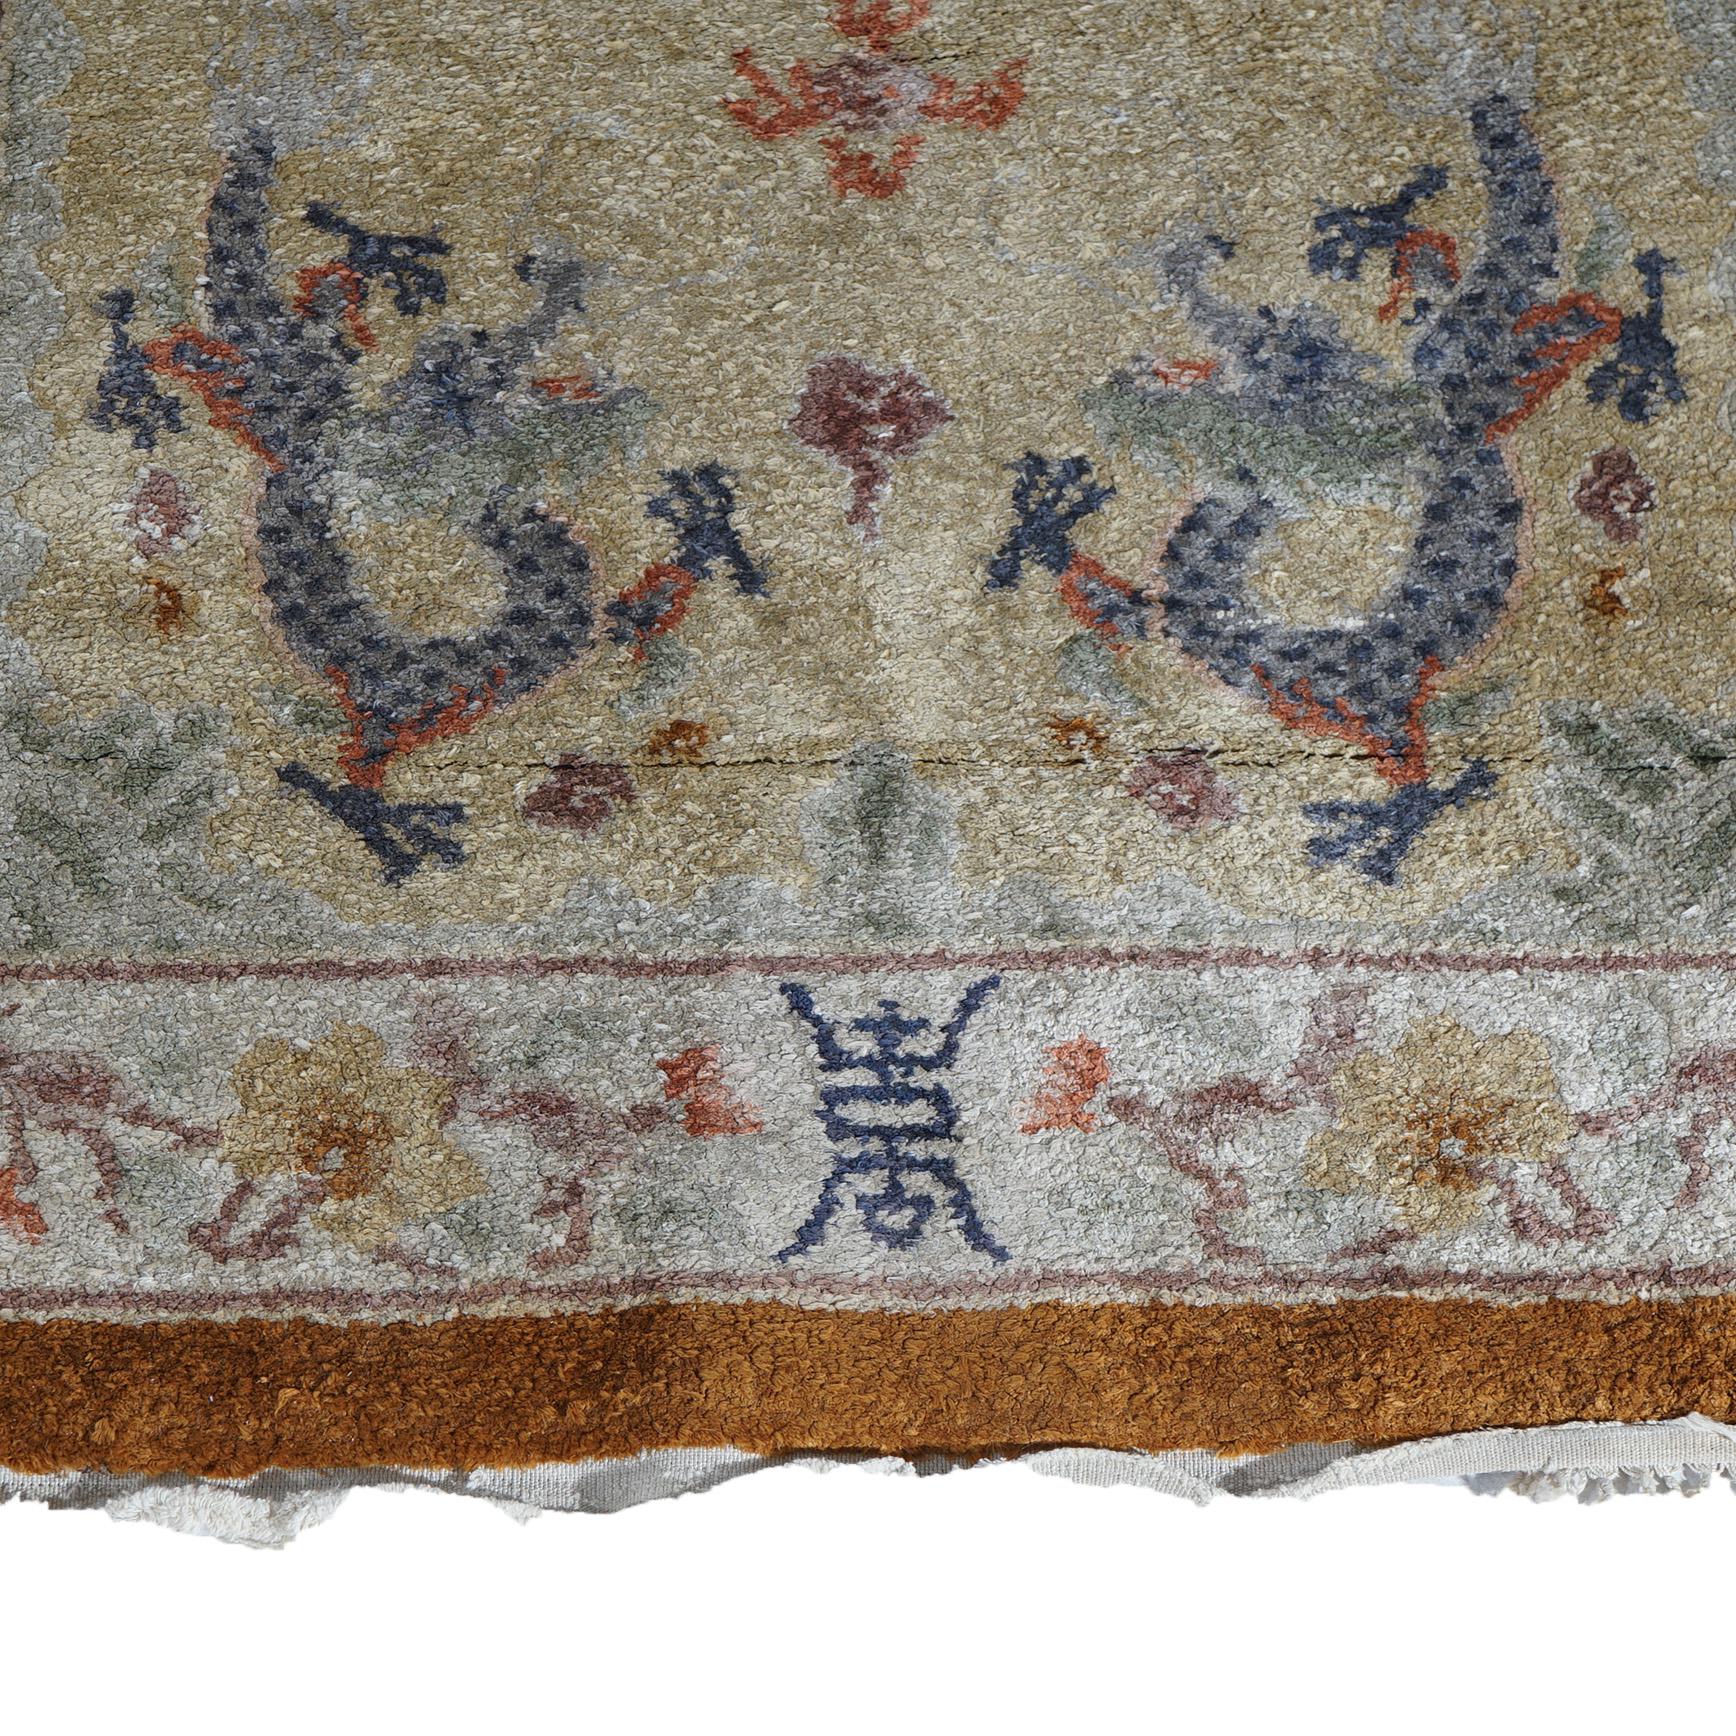 20th Century Antique Silk Chinese Oriental Rug with Dragons & Symbols Circa 1920 For Sale